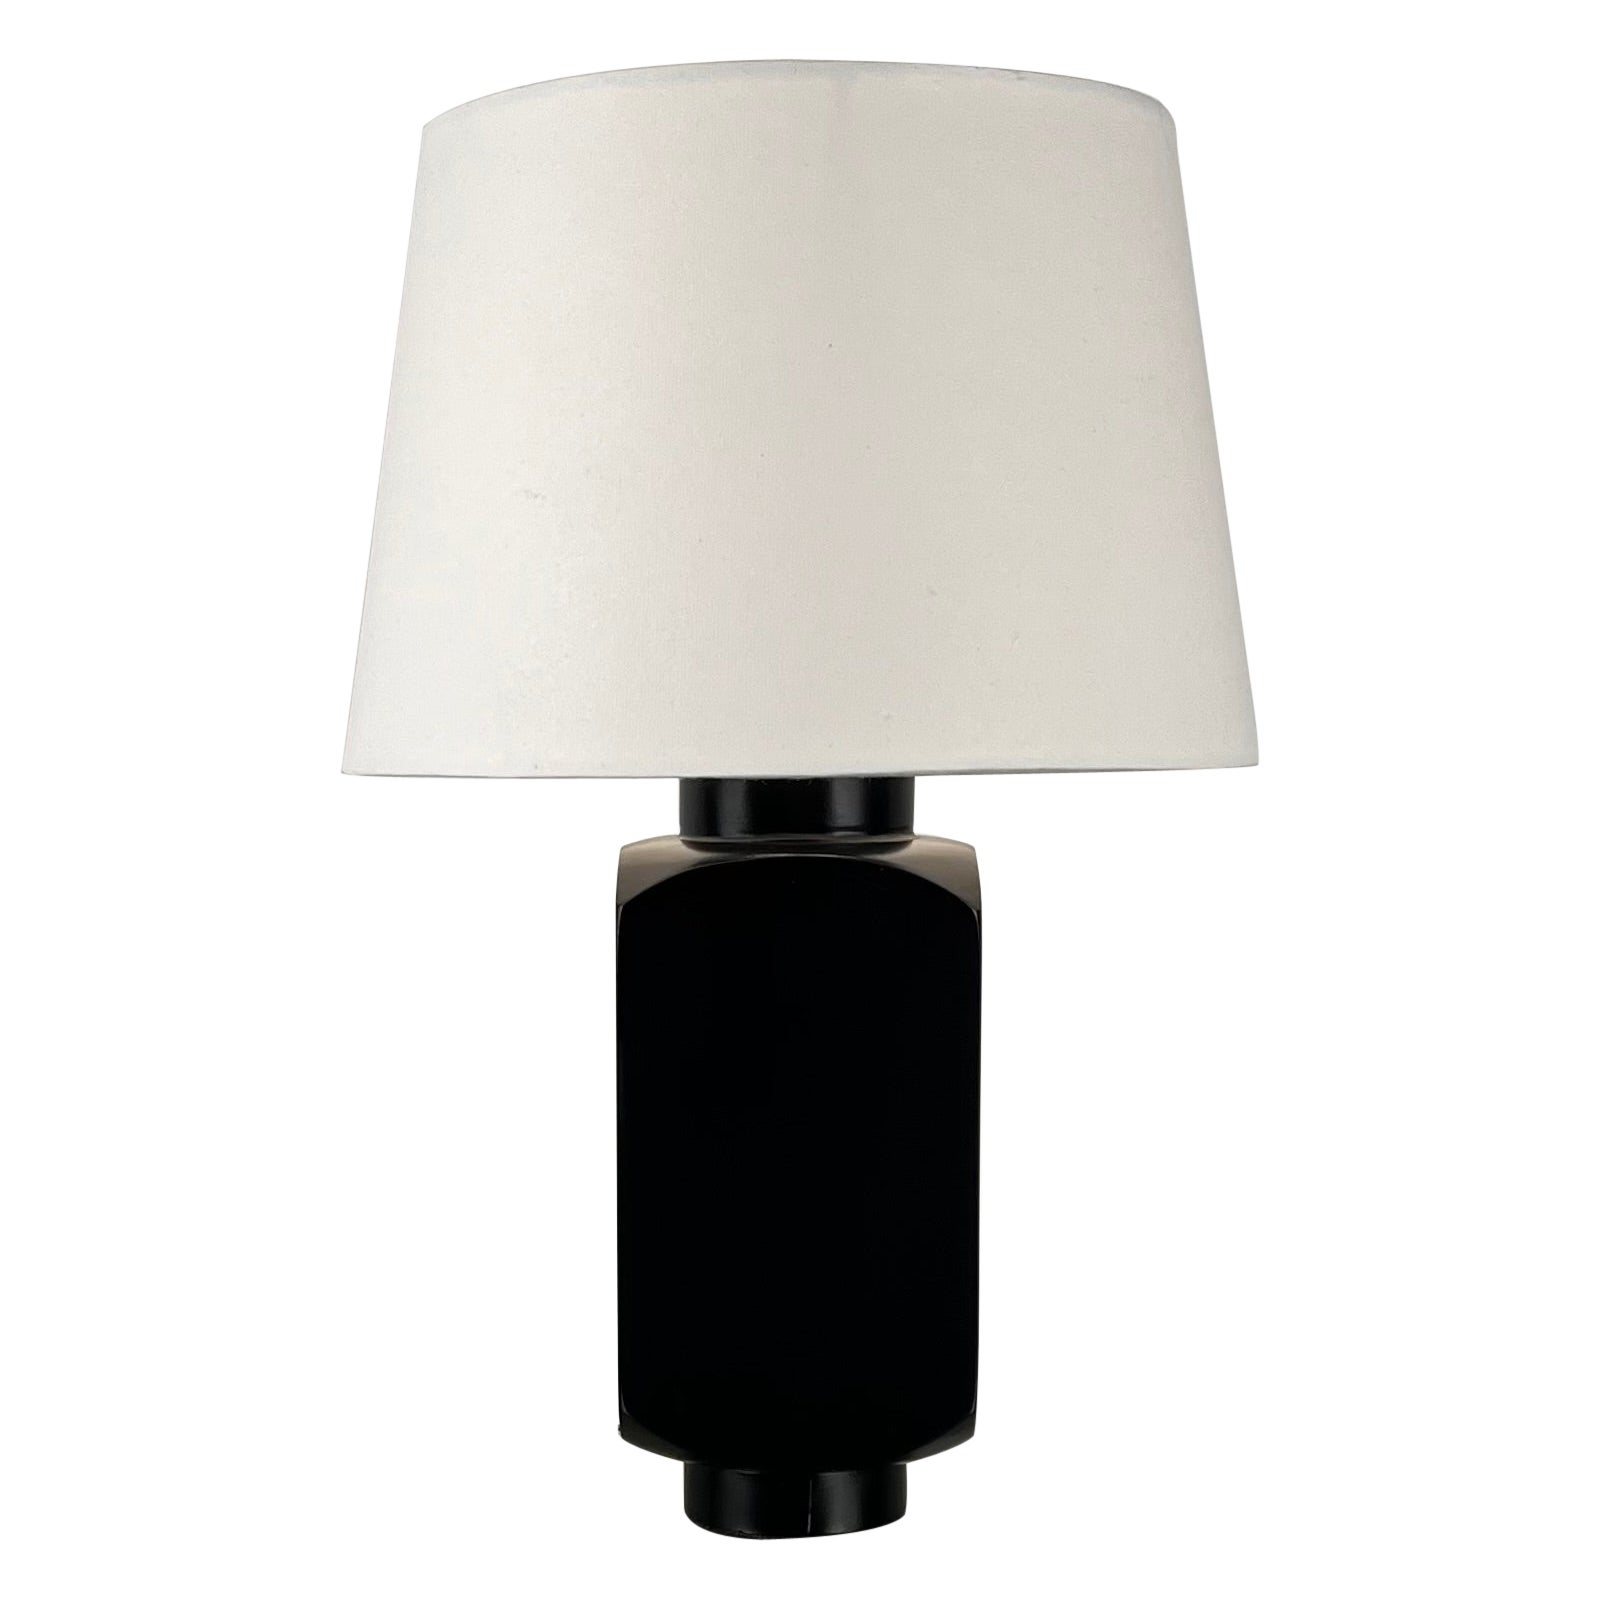 'Ébène' Table Lamp with Parchment Shade by Design Frères